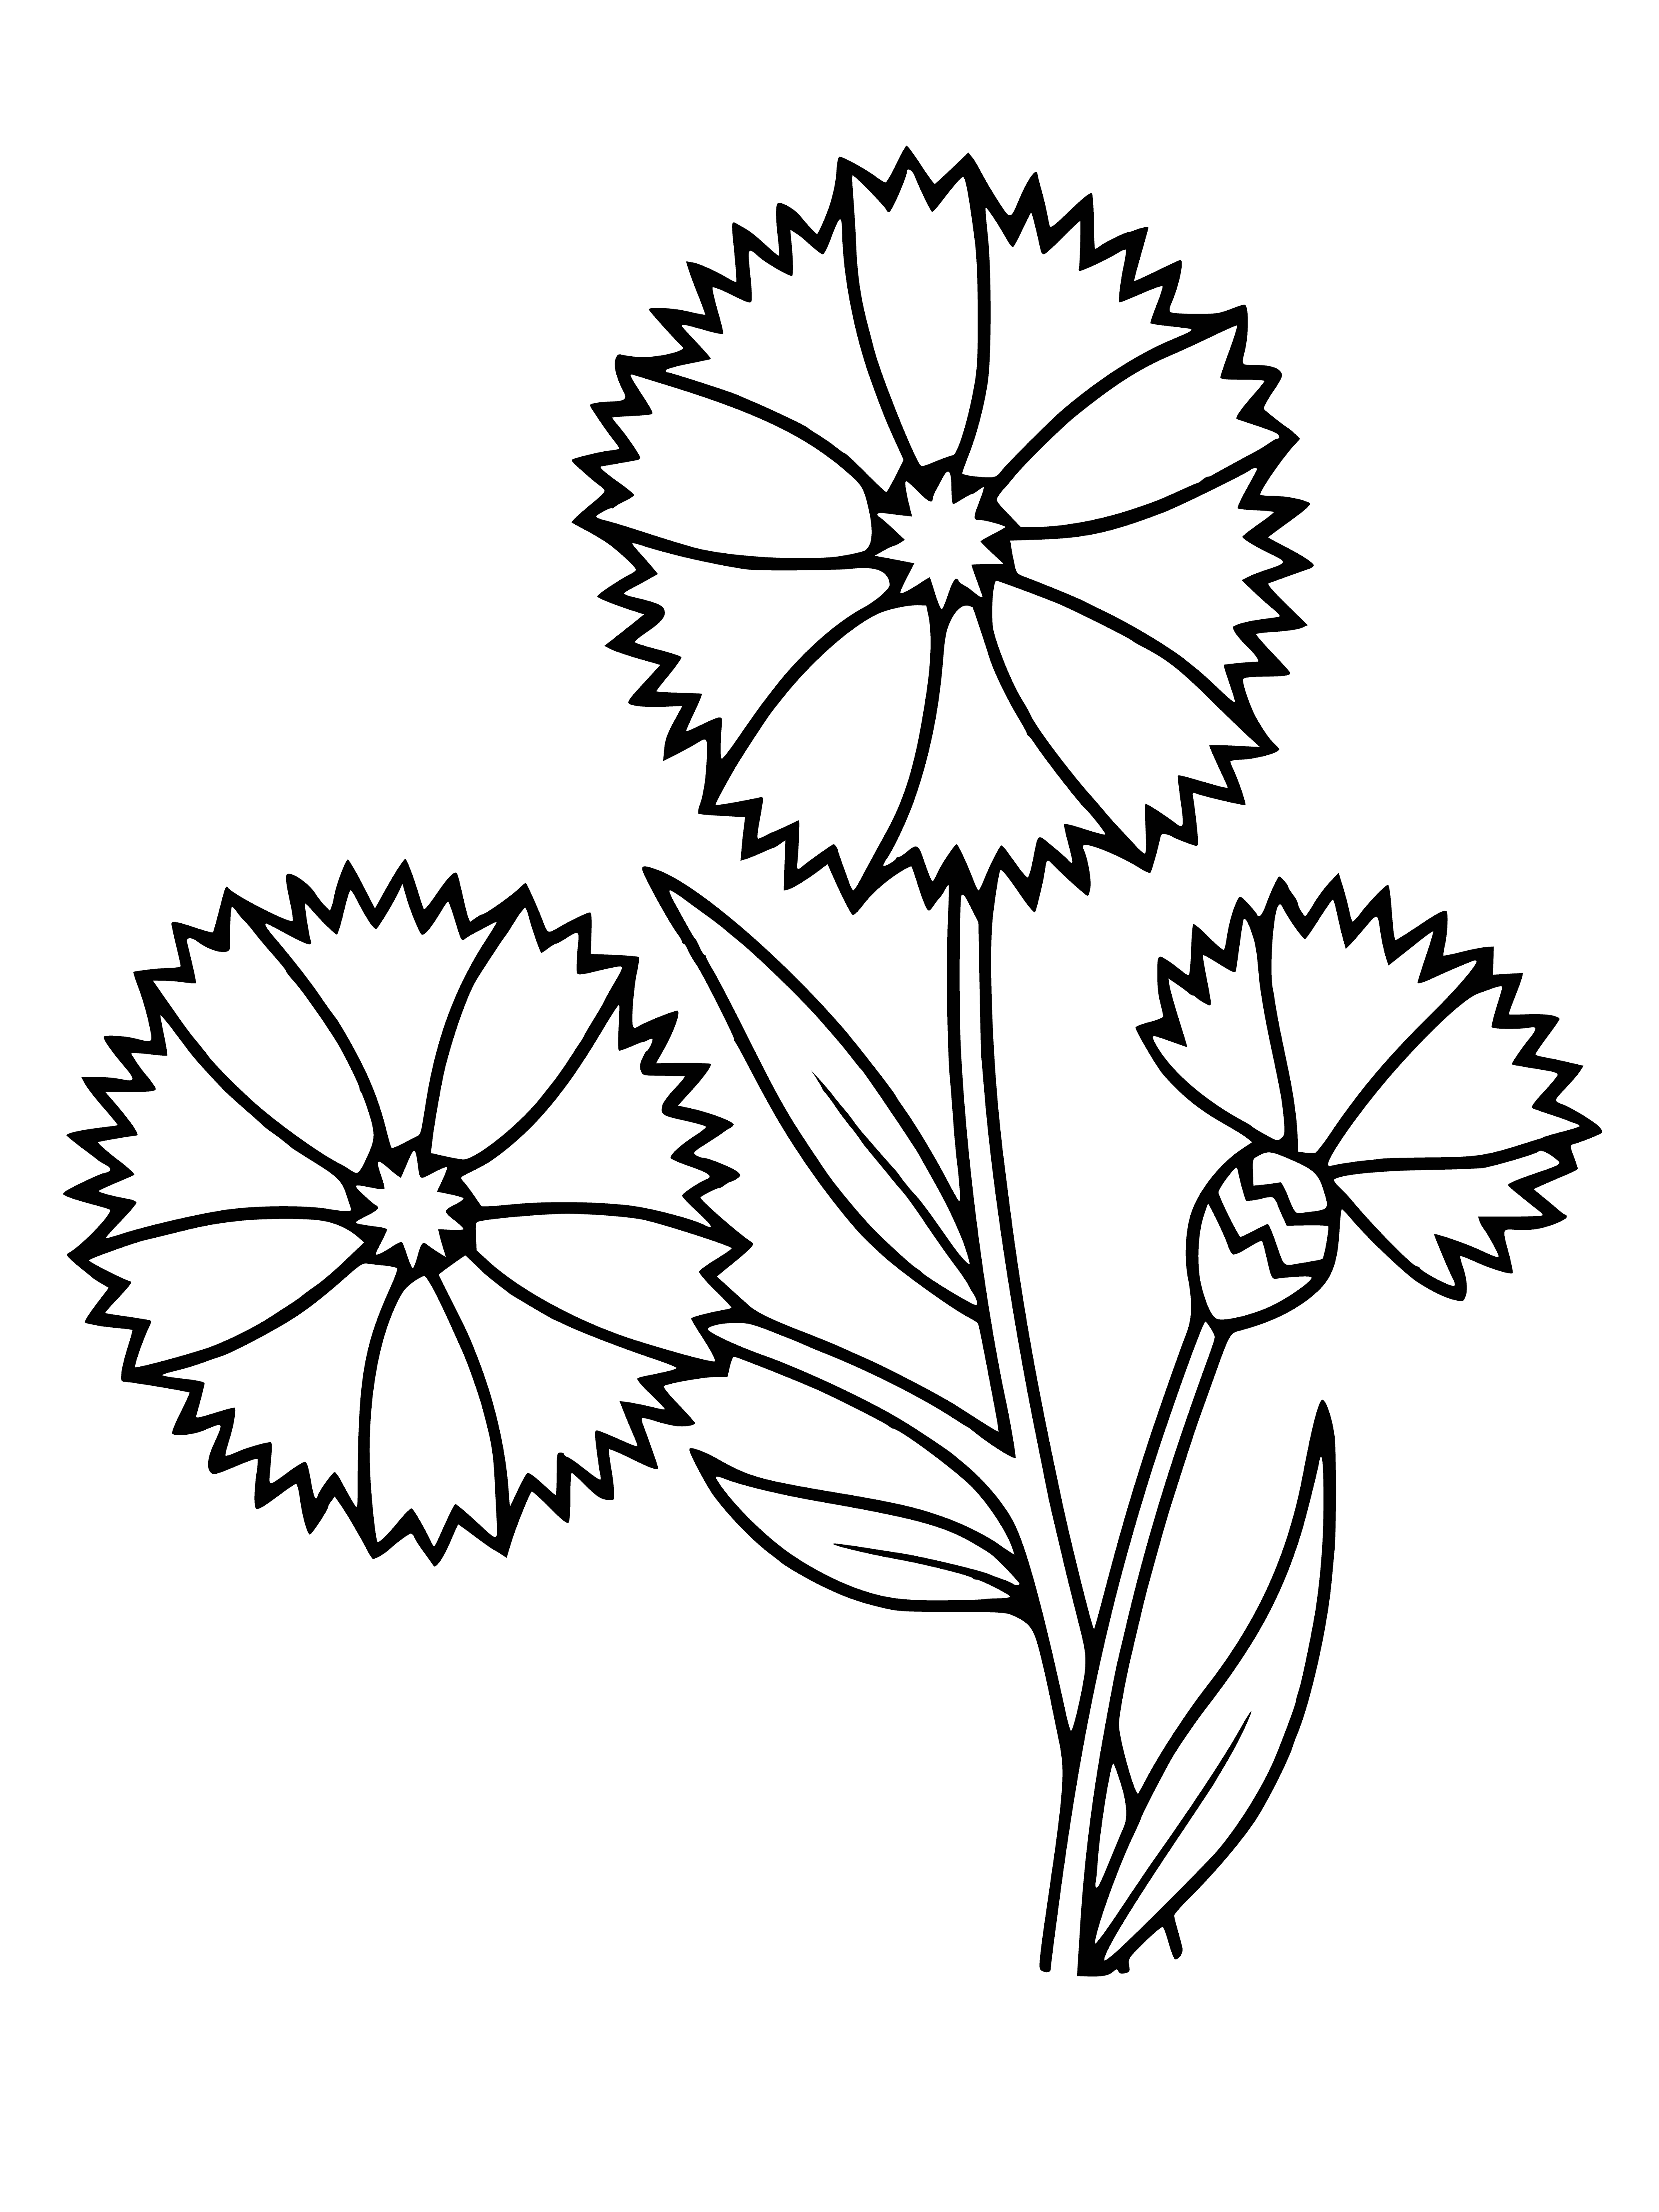 coloring page: Bunches of ruffled cornflowers in various shades of blue, from just beginning to full bloom, with yellow centers & long green leaves.